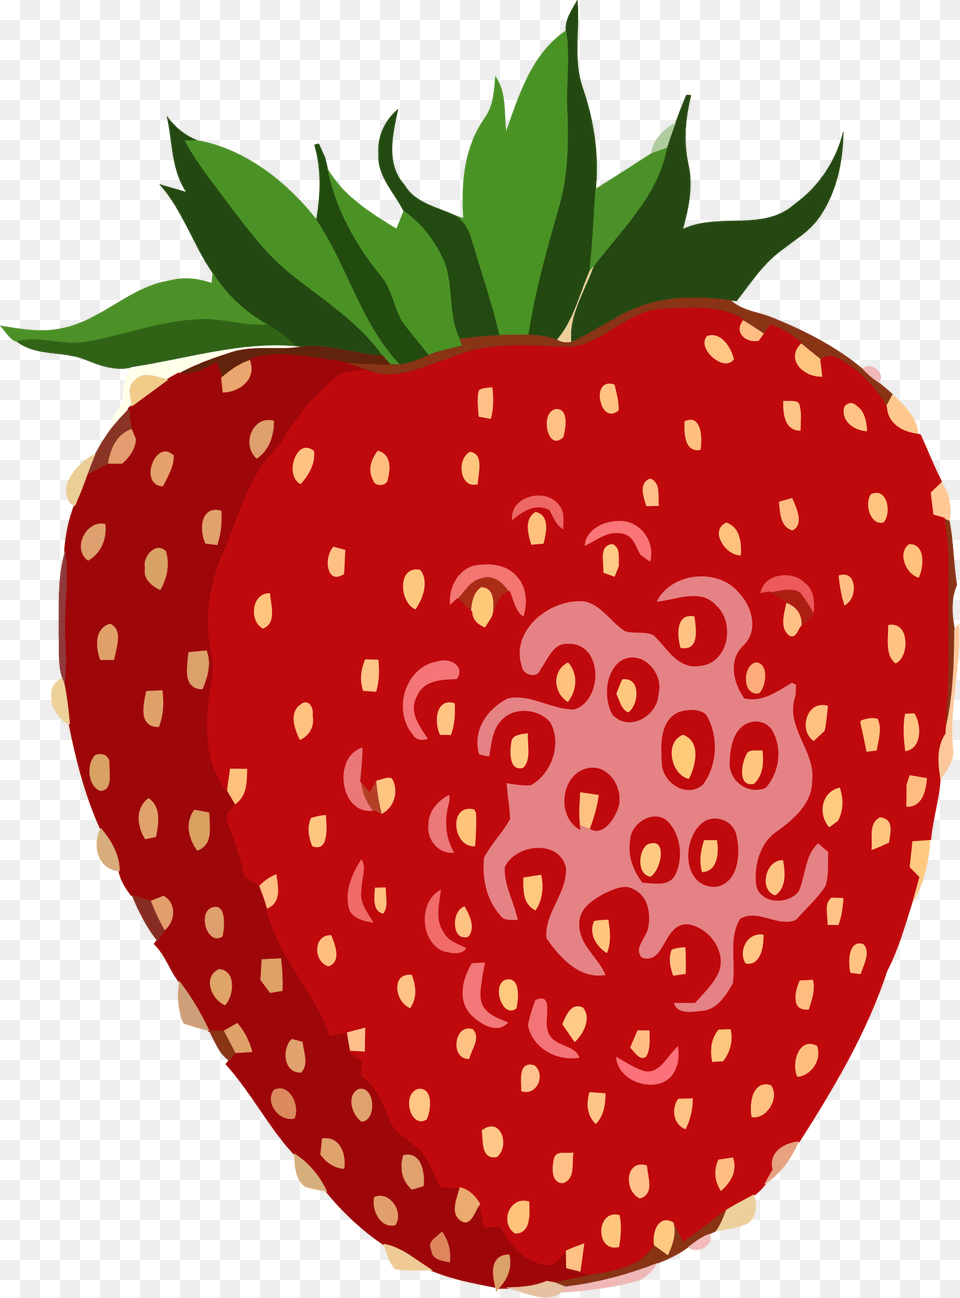 Shiny Strawberry Clip Arts Clipart Of A Strawberry, Berry, Food, Fruit, Plant Png Image